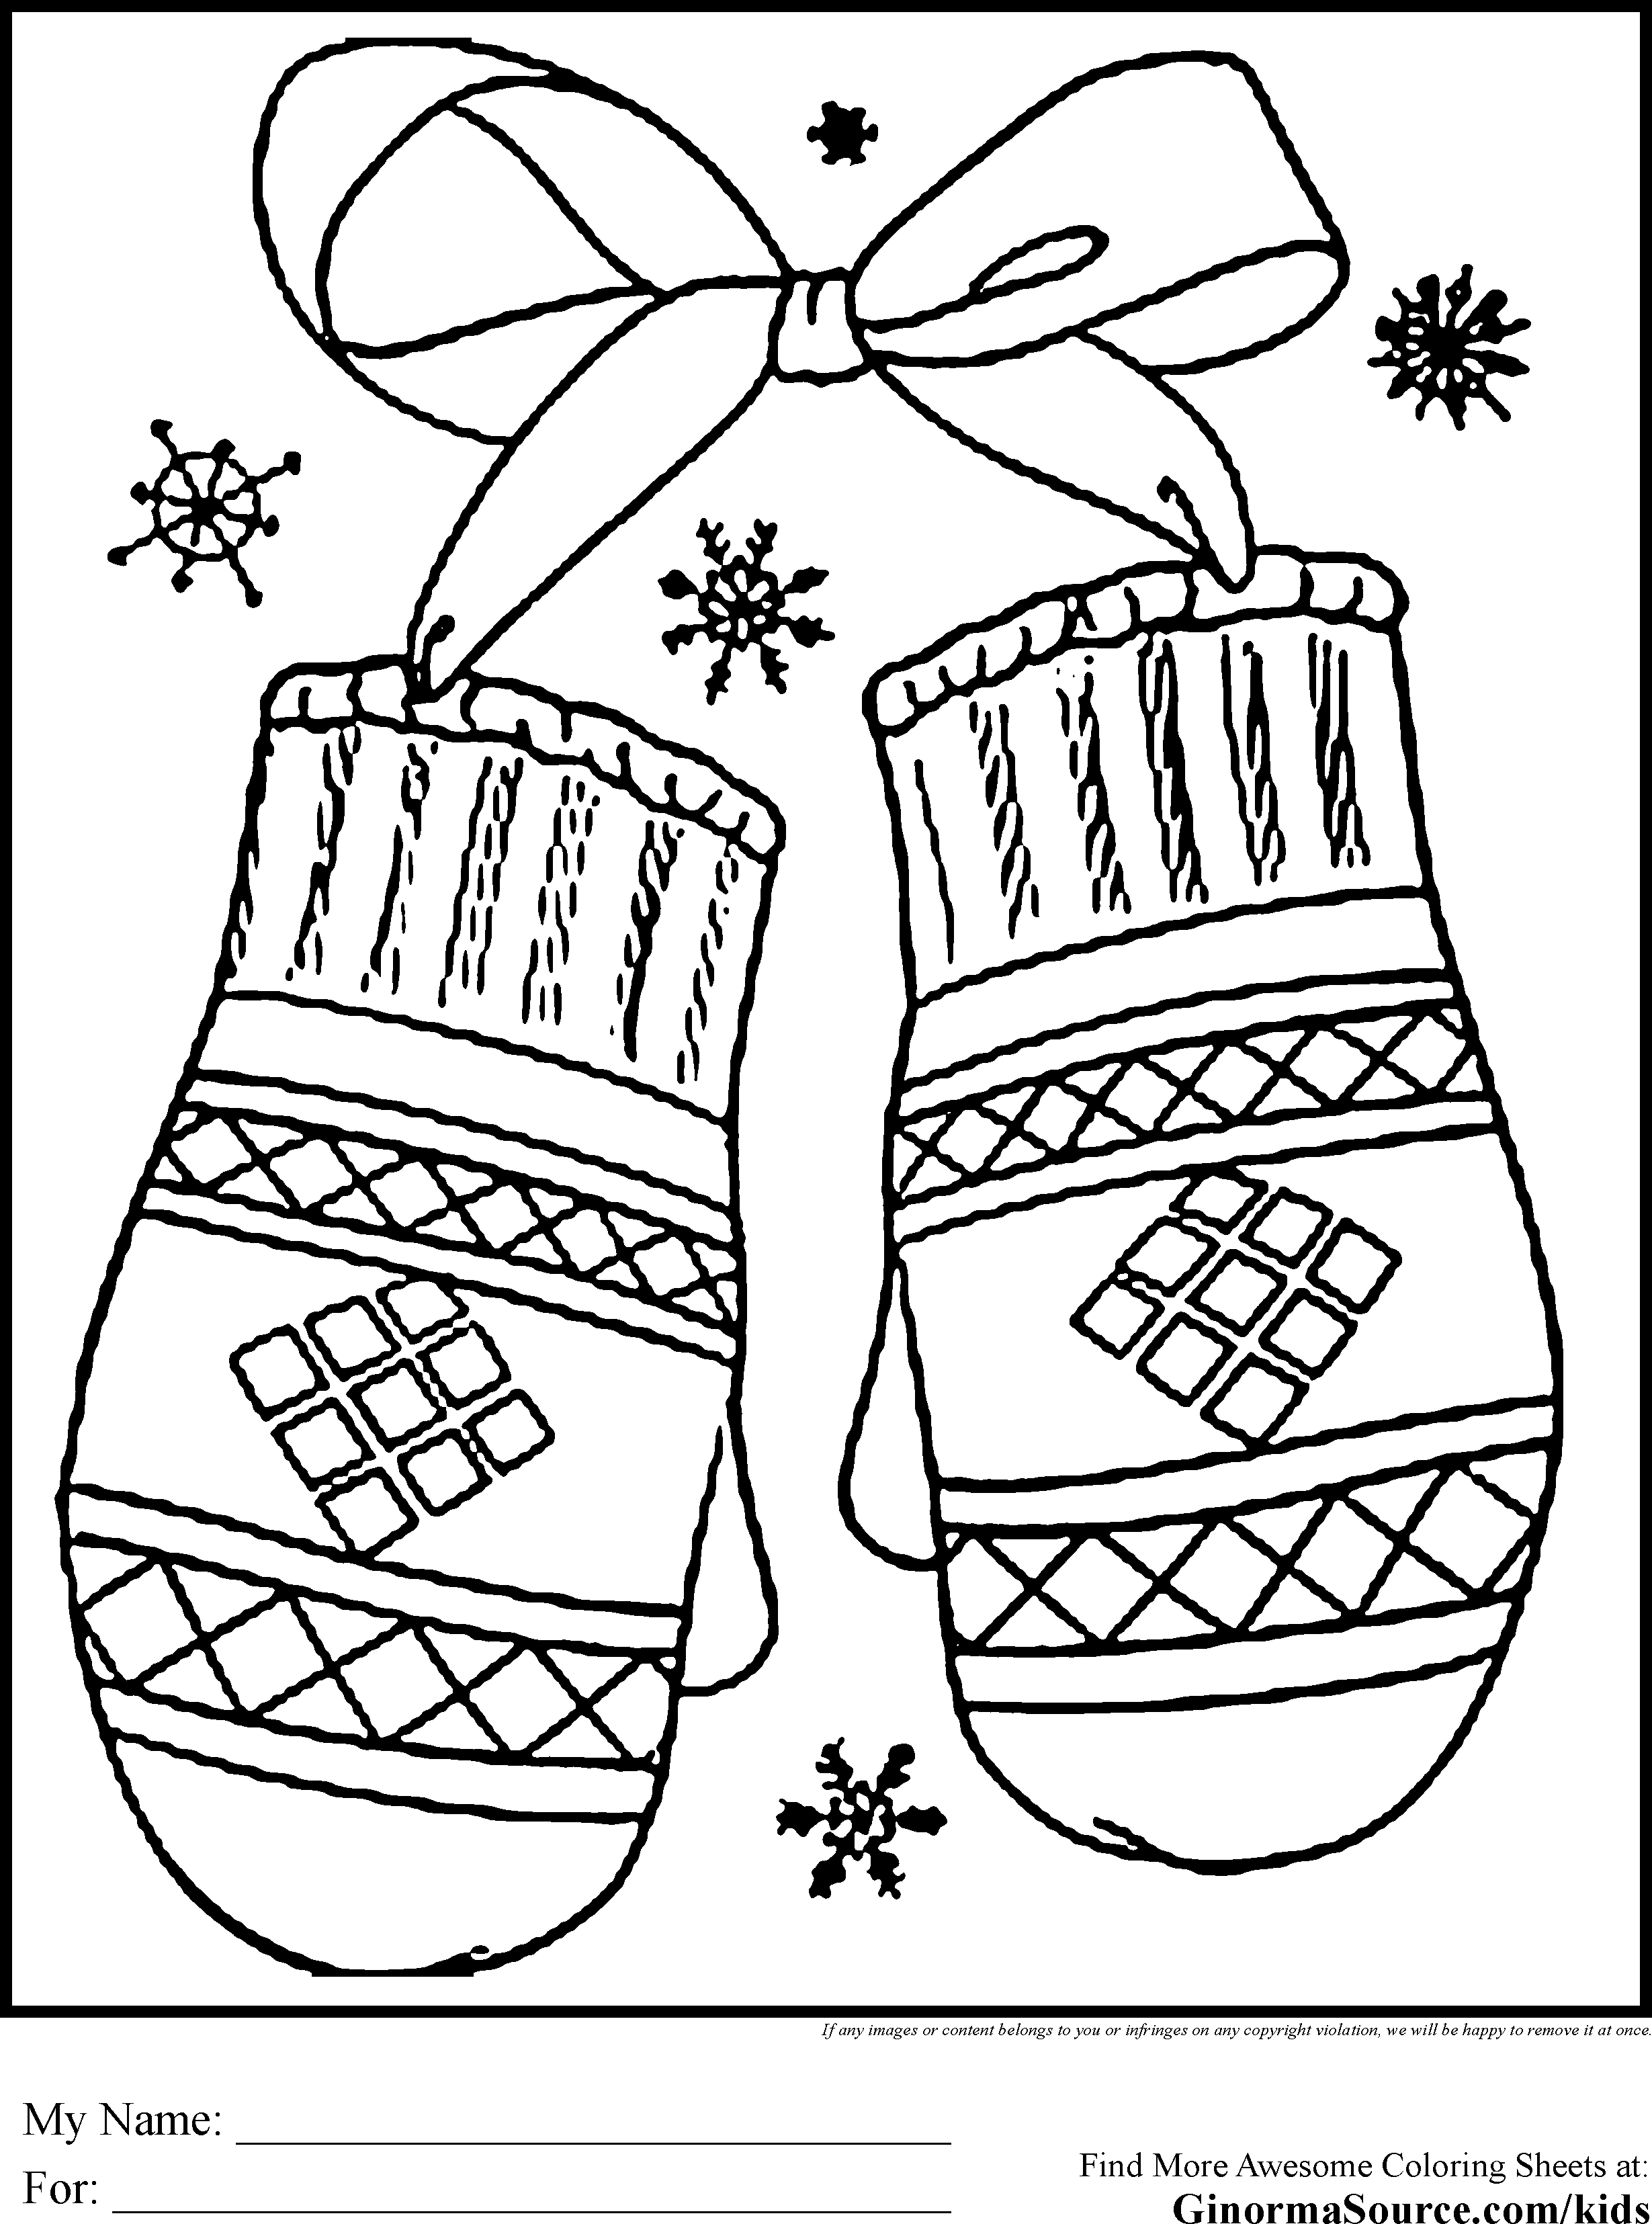 colouring sheets winter winter coloring pages to download and print for free sheets winter colouring 